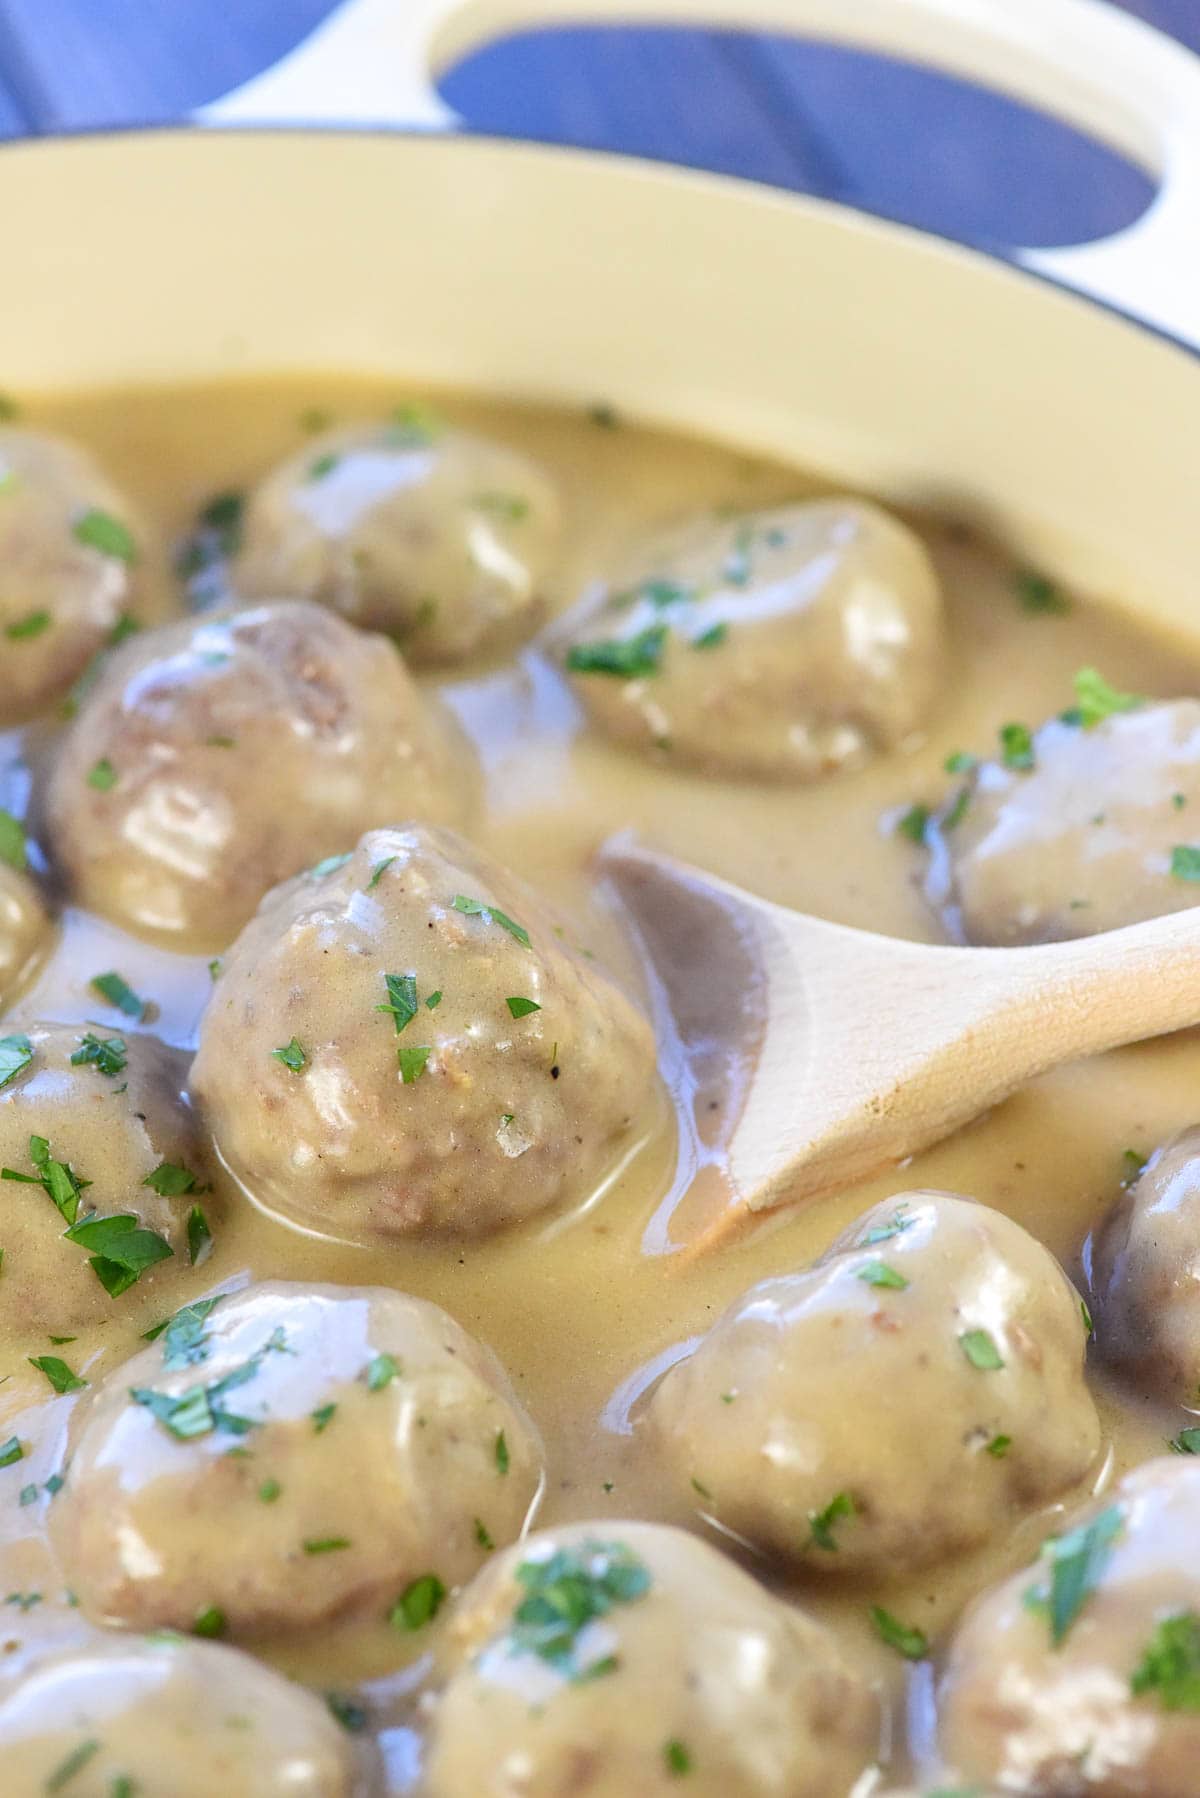 Wooden spoon scooping Swedish Meatballs out of sauce.